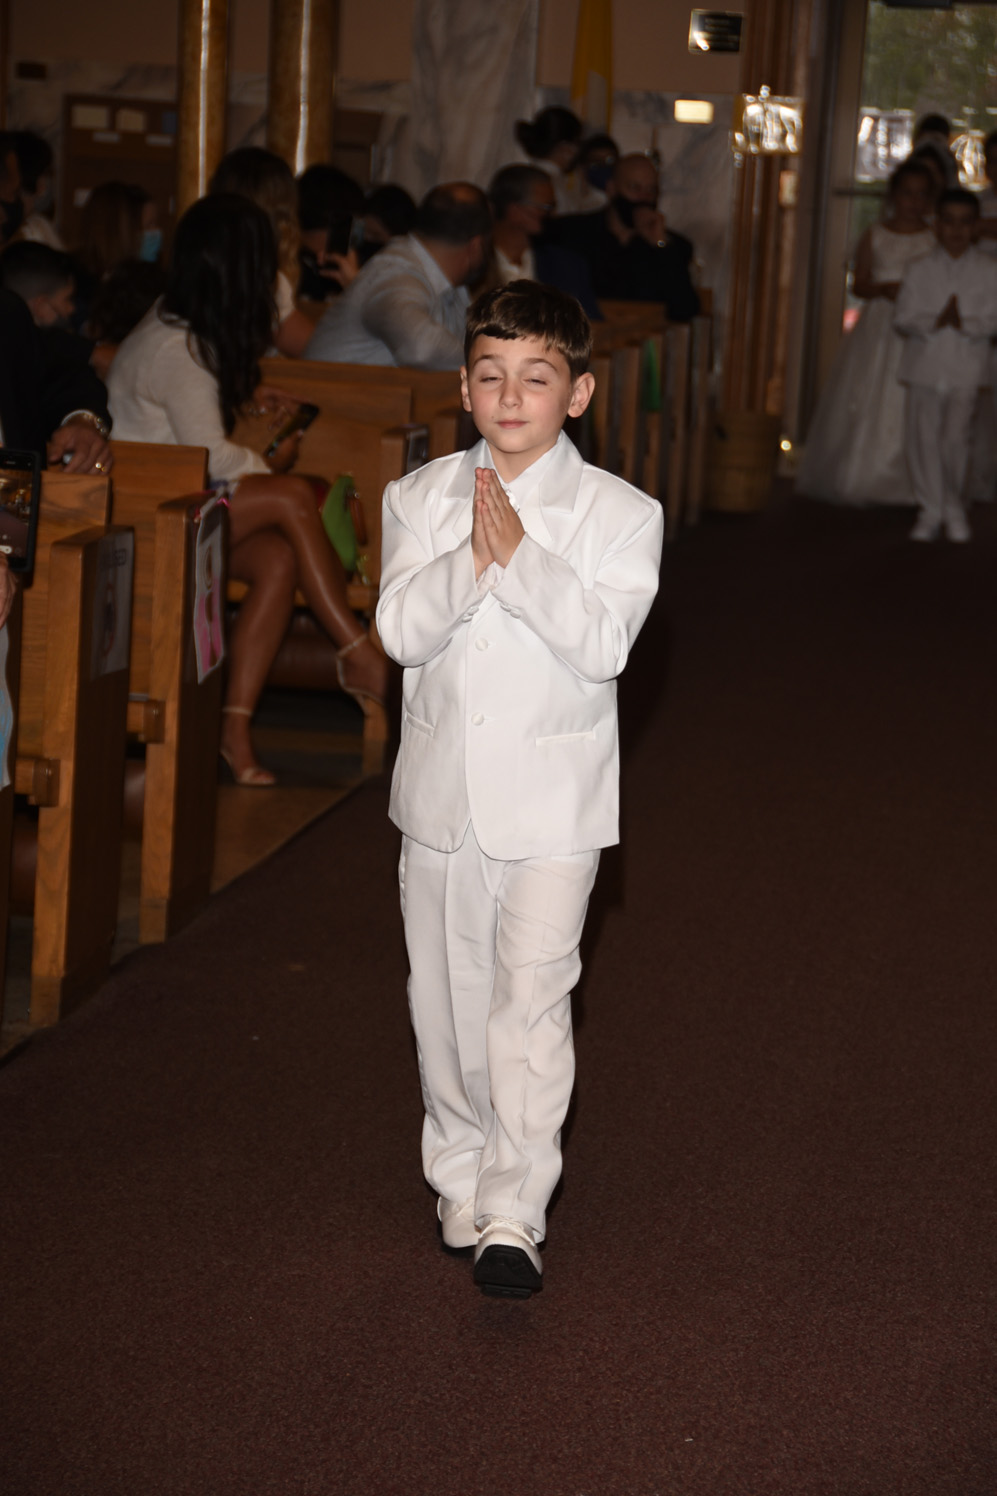 FIRST-COMMUNION-MAY-2-2021-1001001160